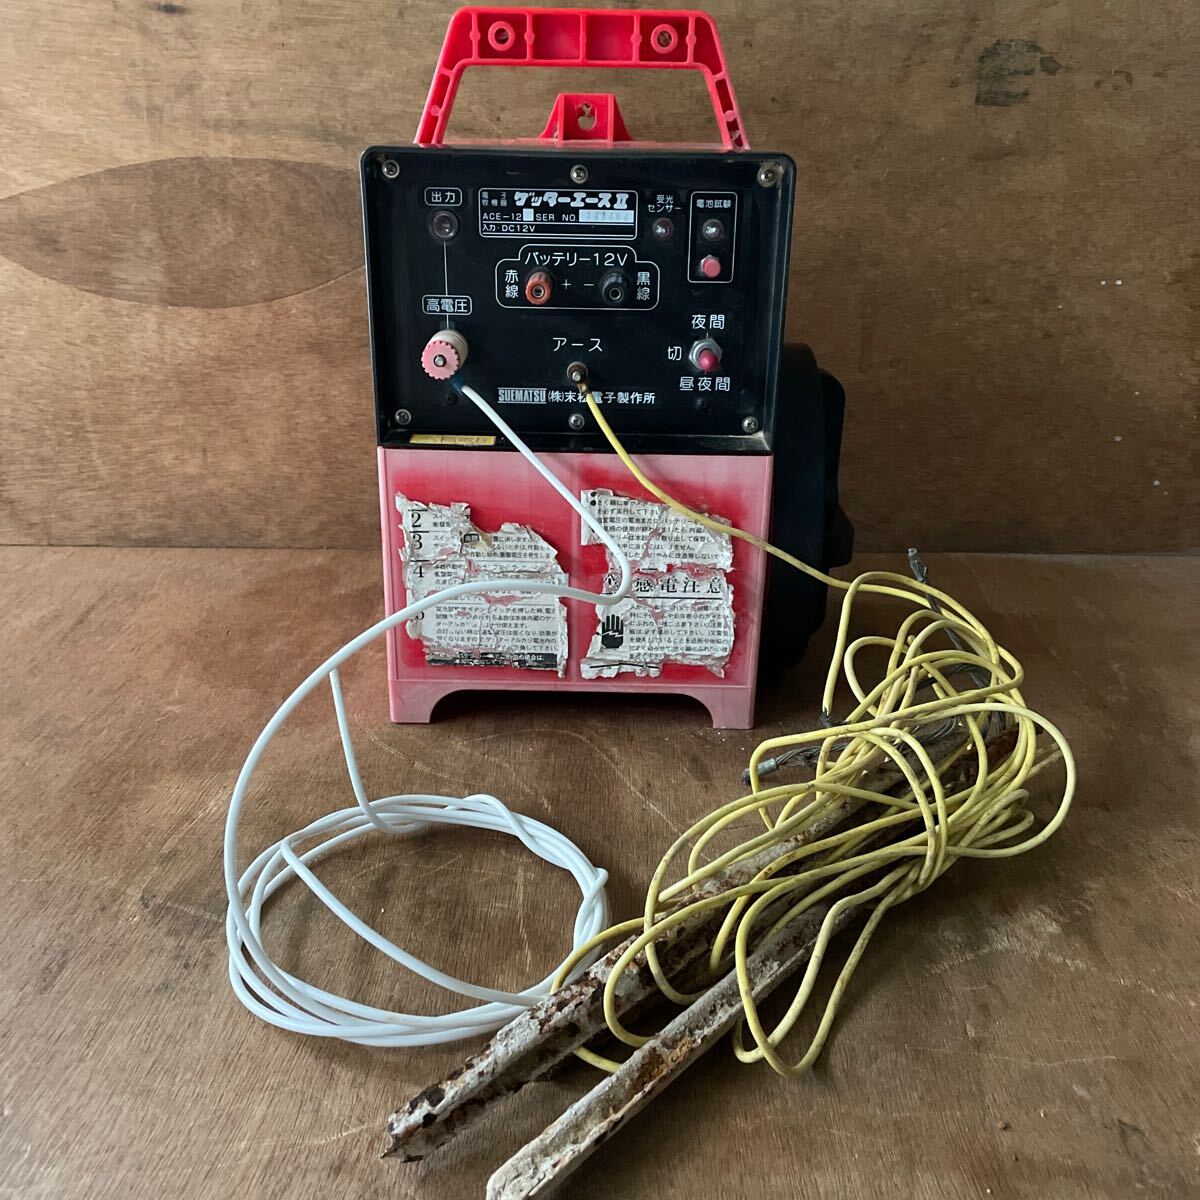  end pine electron factory geta- Ace Ⅱ ACE-12 electron .. vessel electric fence electro- . present condition goods 